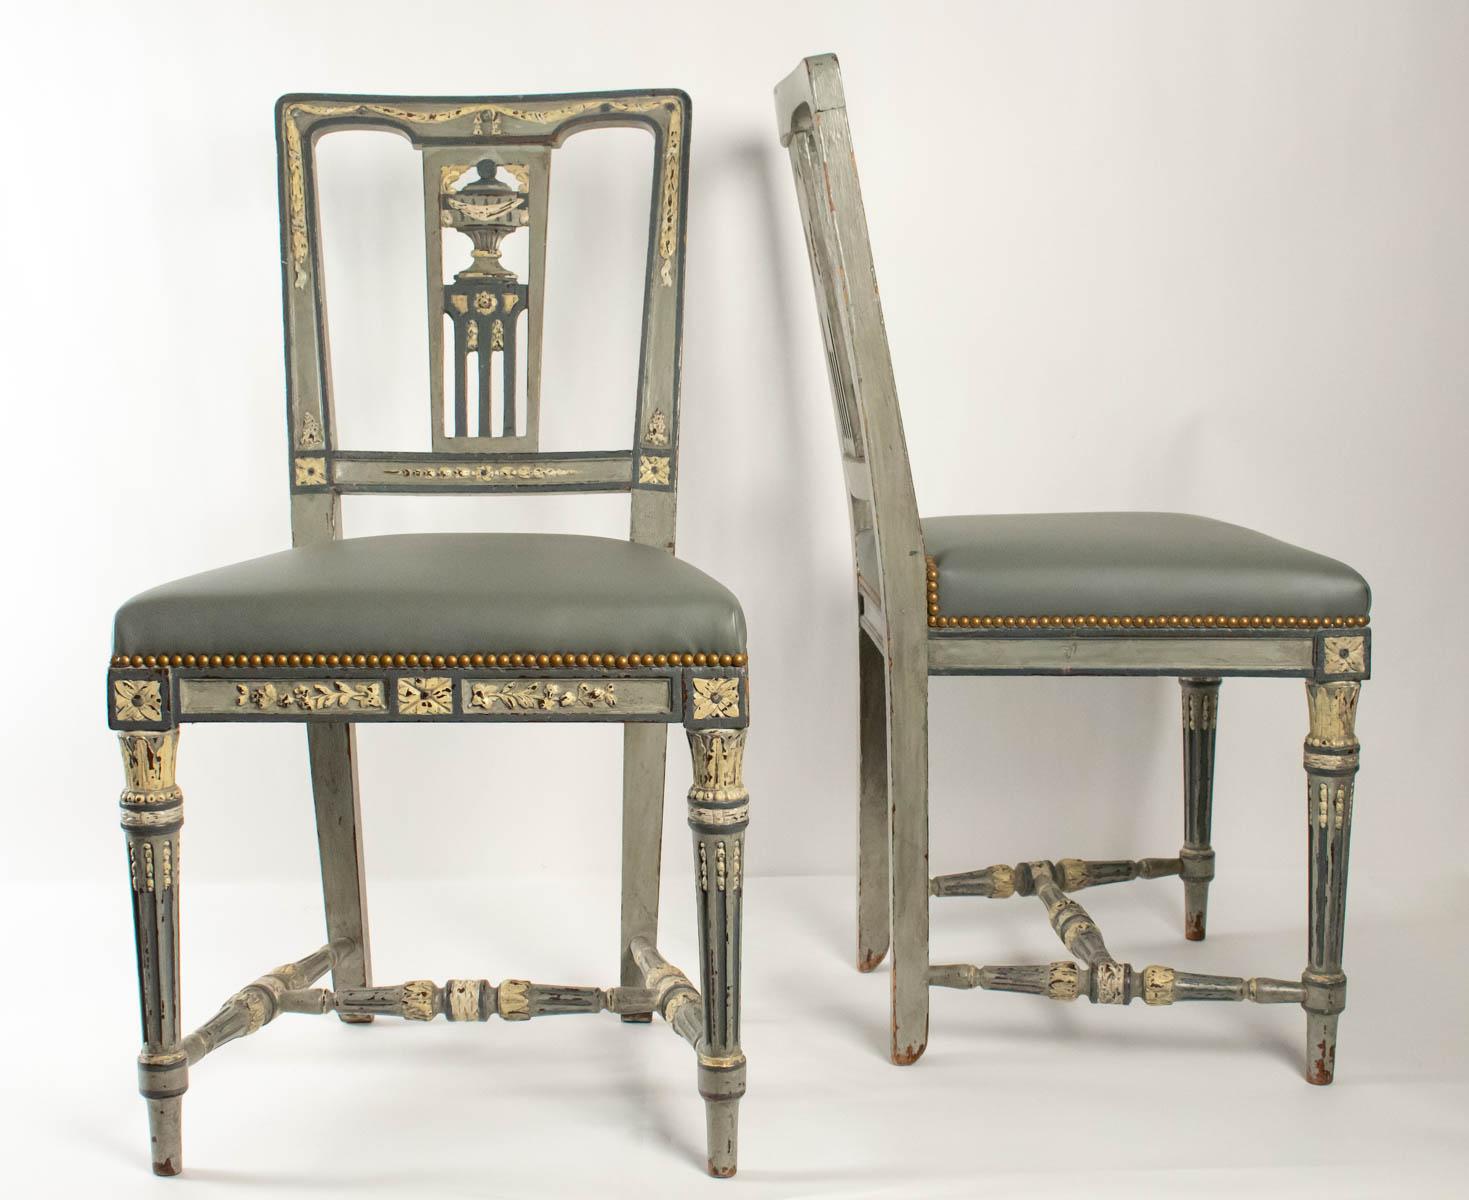 Pair Of Chairs Louis XVI Style From The 19th Century, Antiquity 2